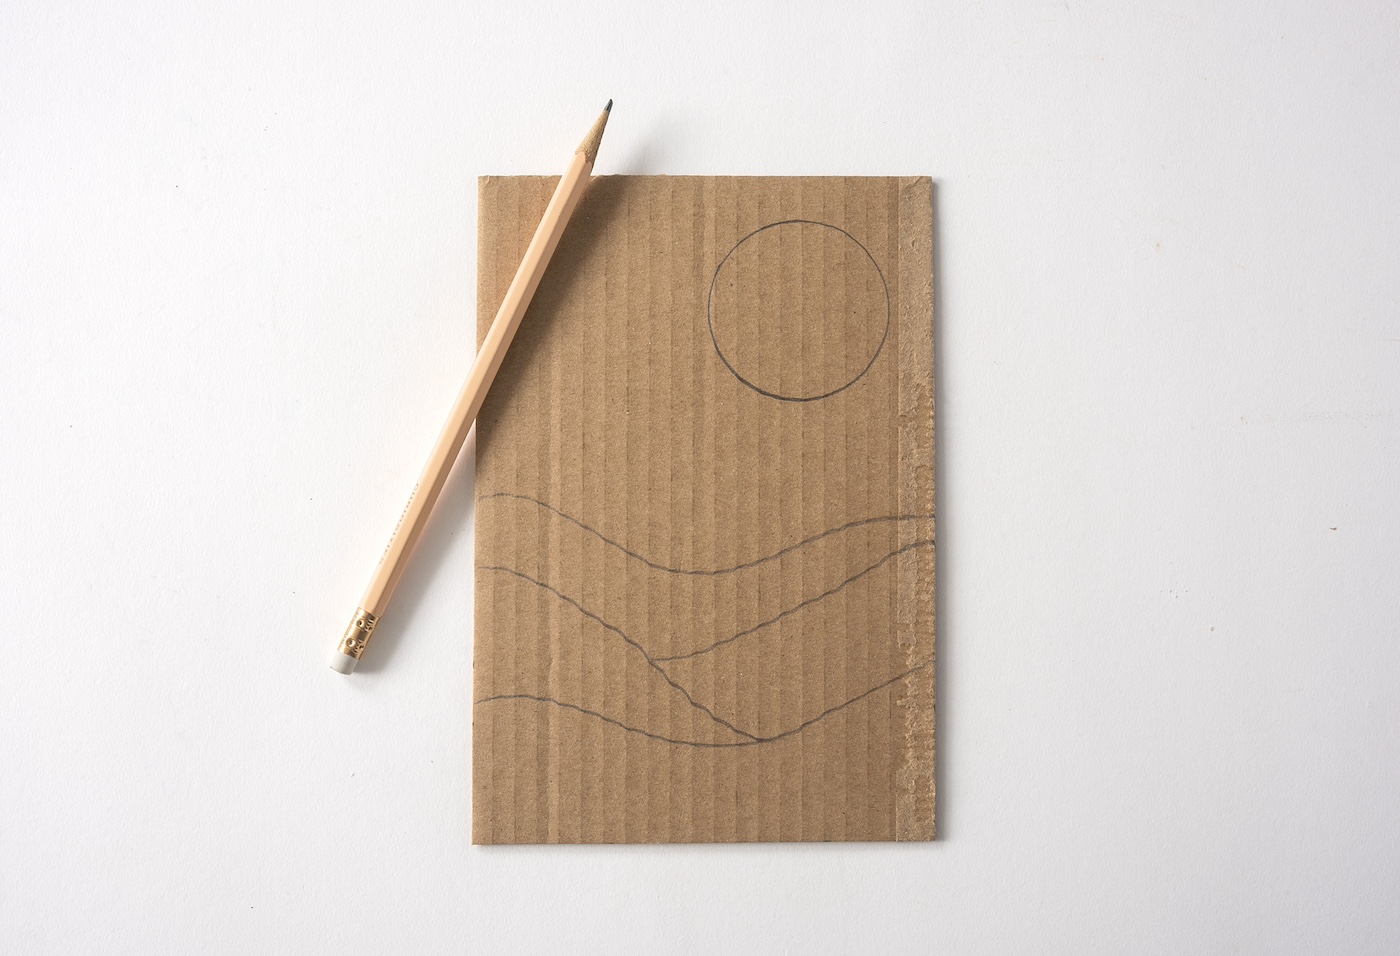 Drawing the design on cardboard with a pencil